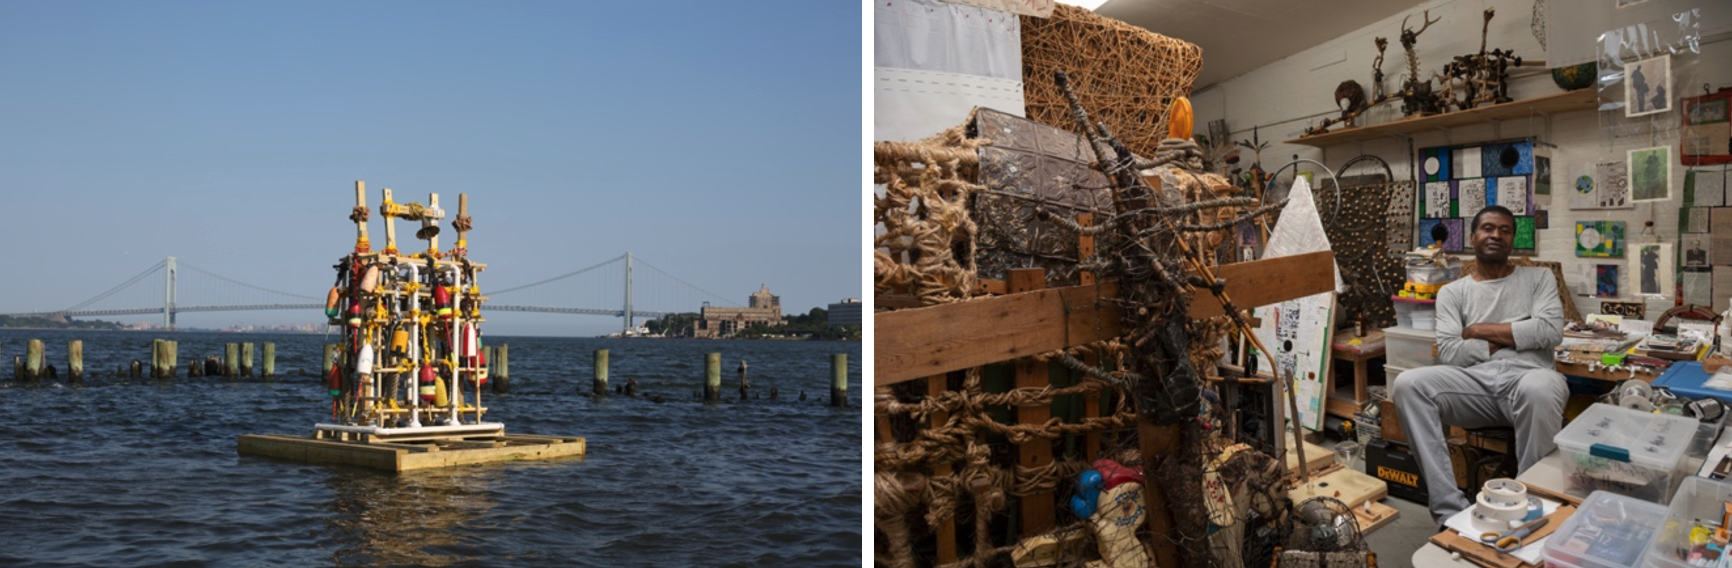 (left) Arthur Simms, Float, Float, Float On, 2018, installation on the Staten Island shore, 127.5 x 99 x 99 inches. photo: Sam Samore. (right) photo of Arthur Simms in his studio: Charles Benton